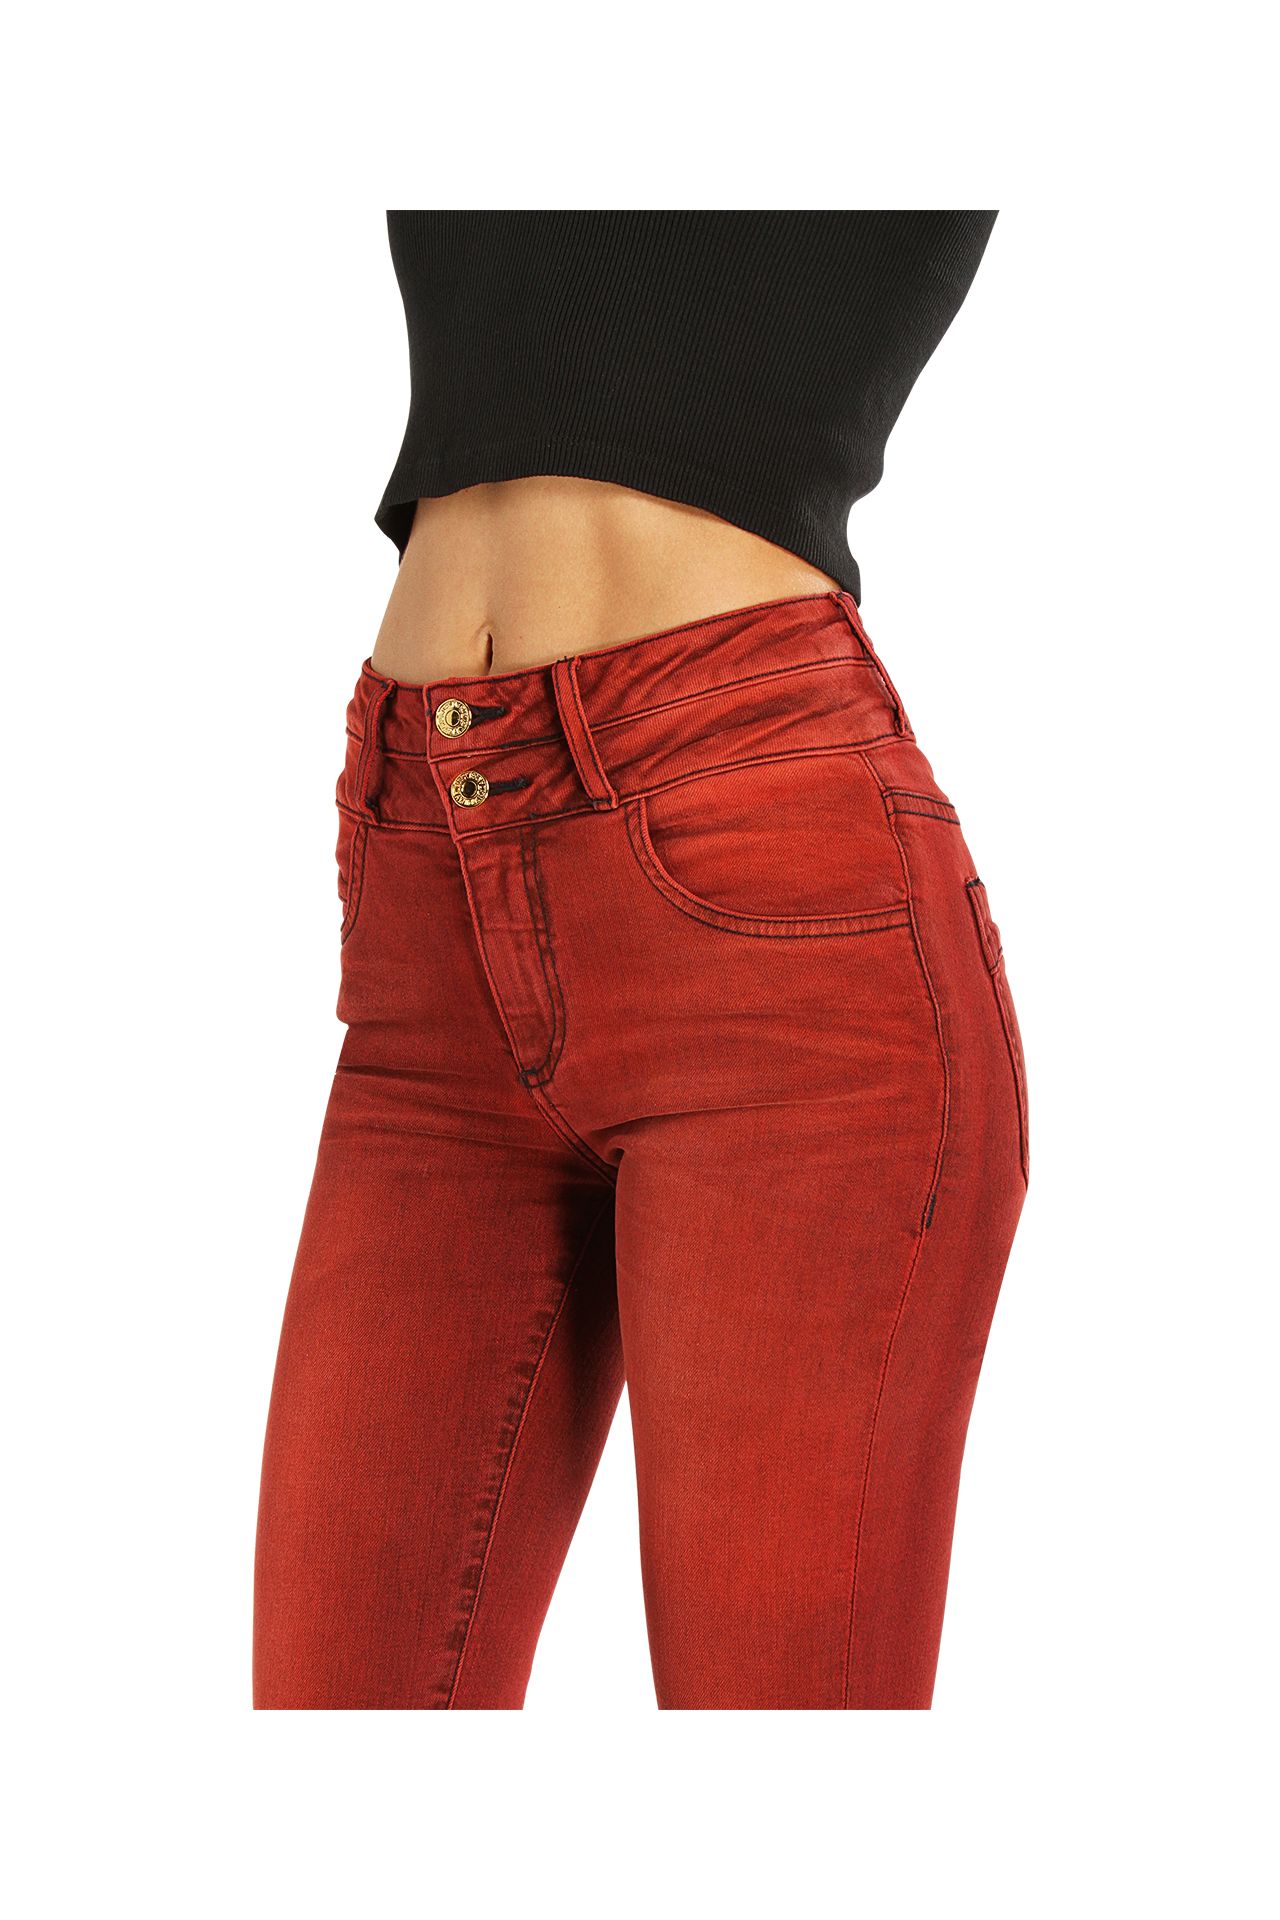 ROBIN'S DOUBLE WAIST SKINNY IN F-UP RED